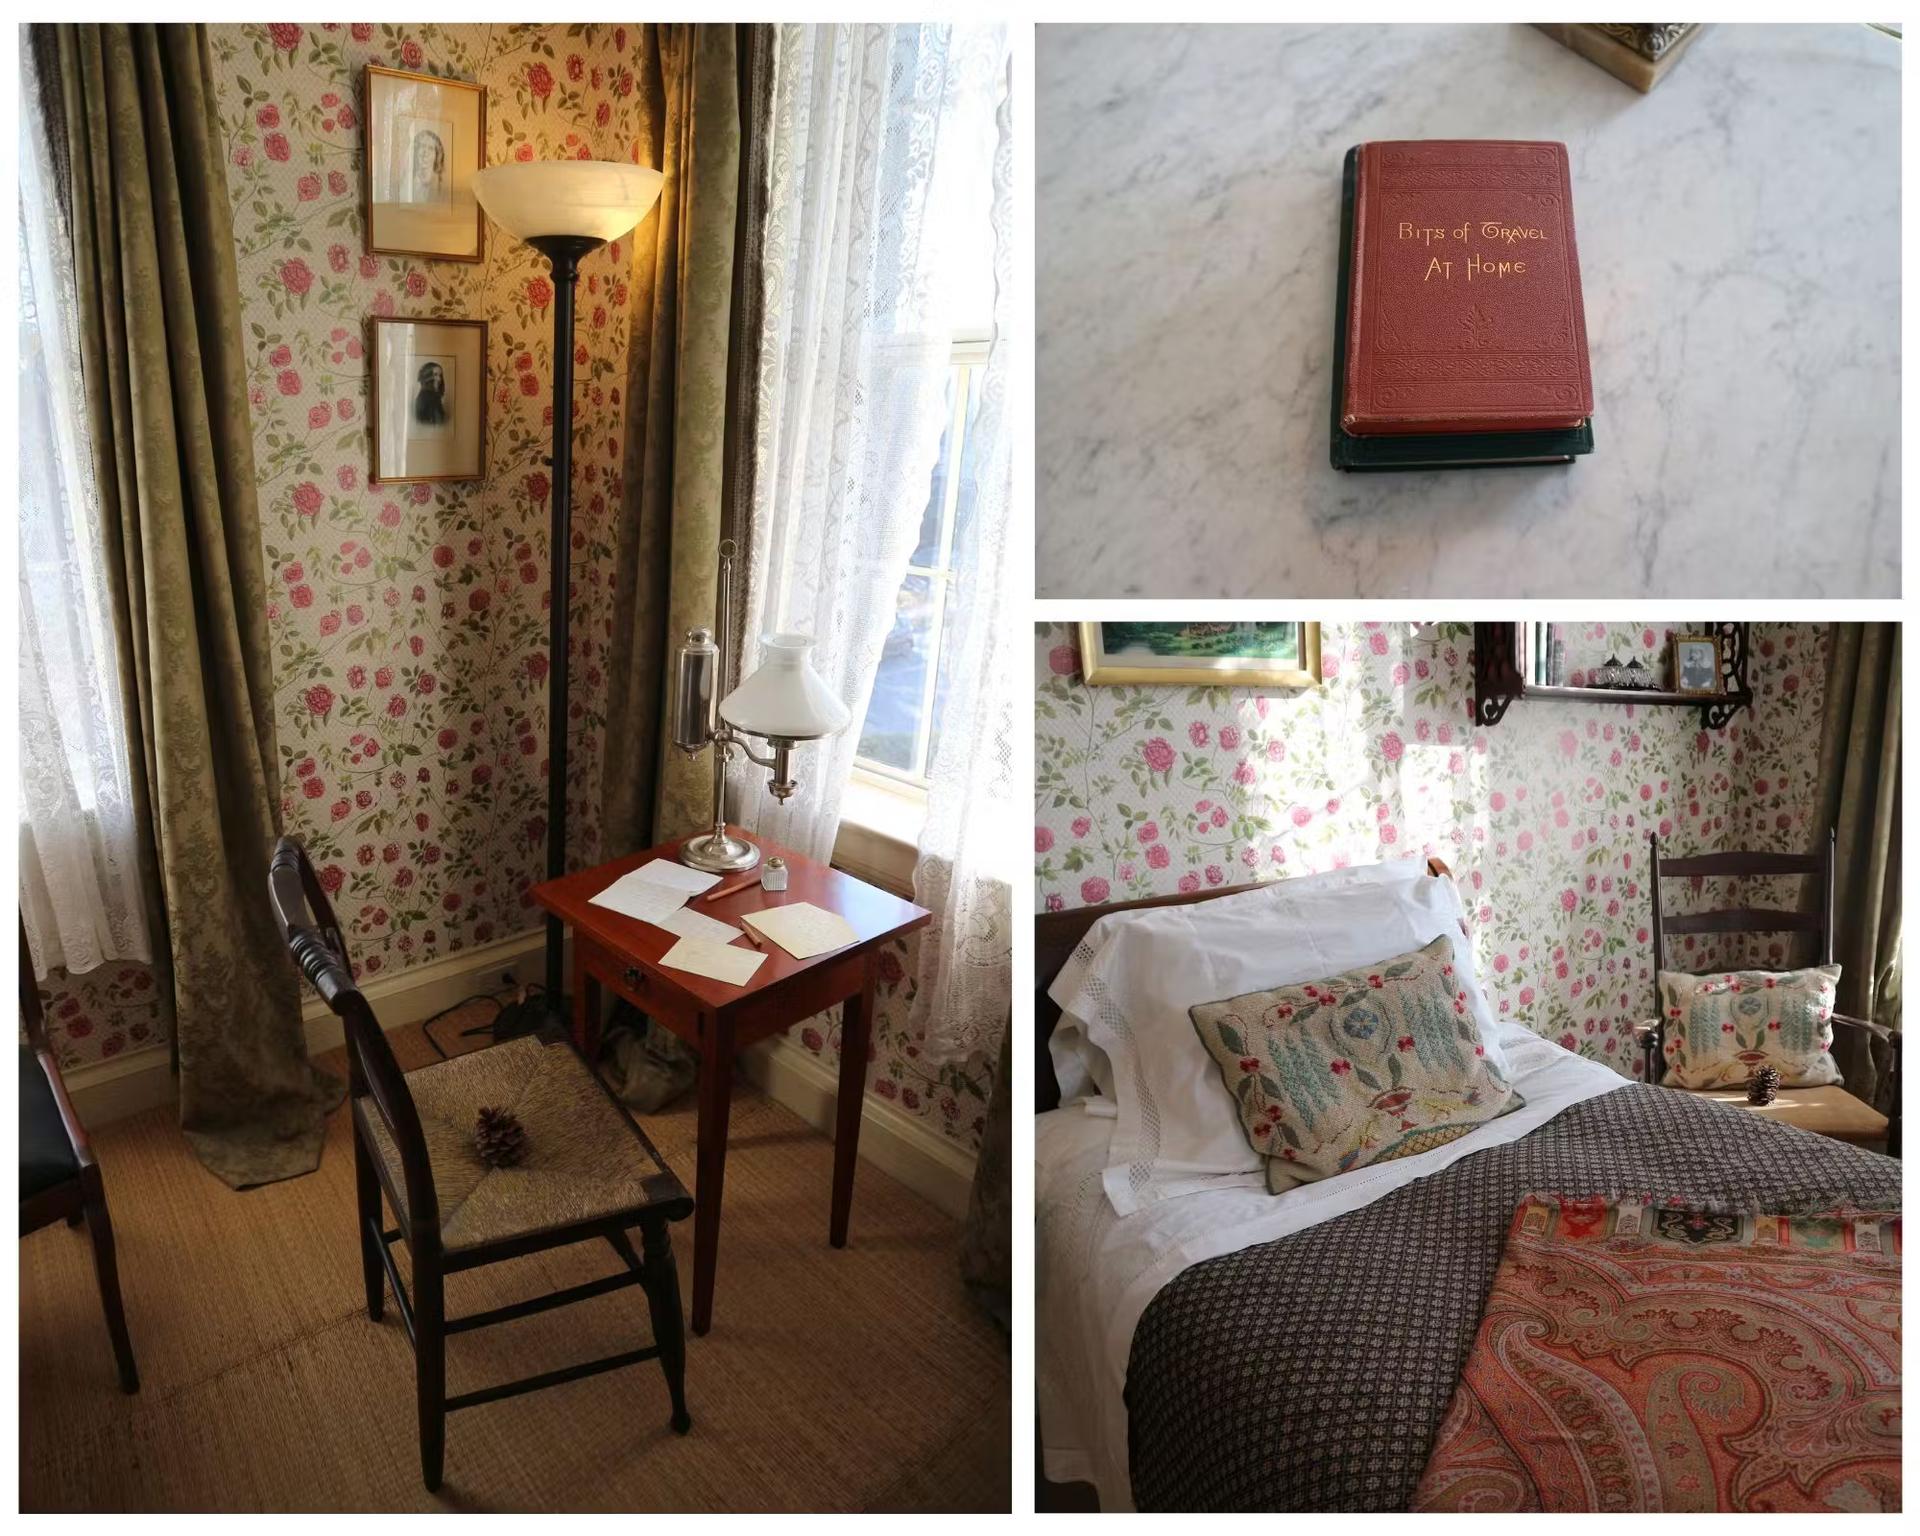 A collage shows a Victorian-style bed, book and desk in Emily Dickinson's home.